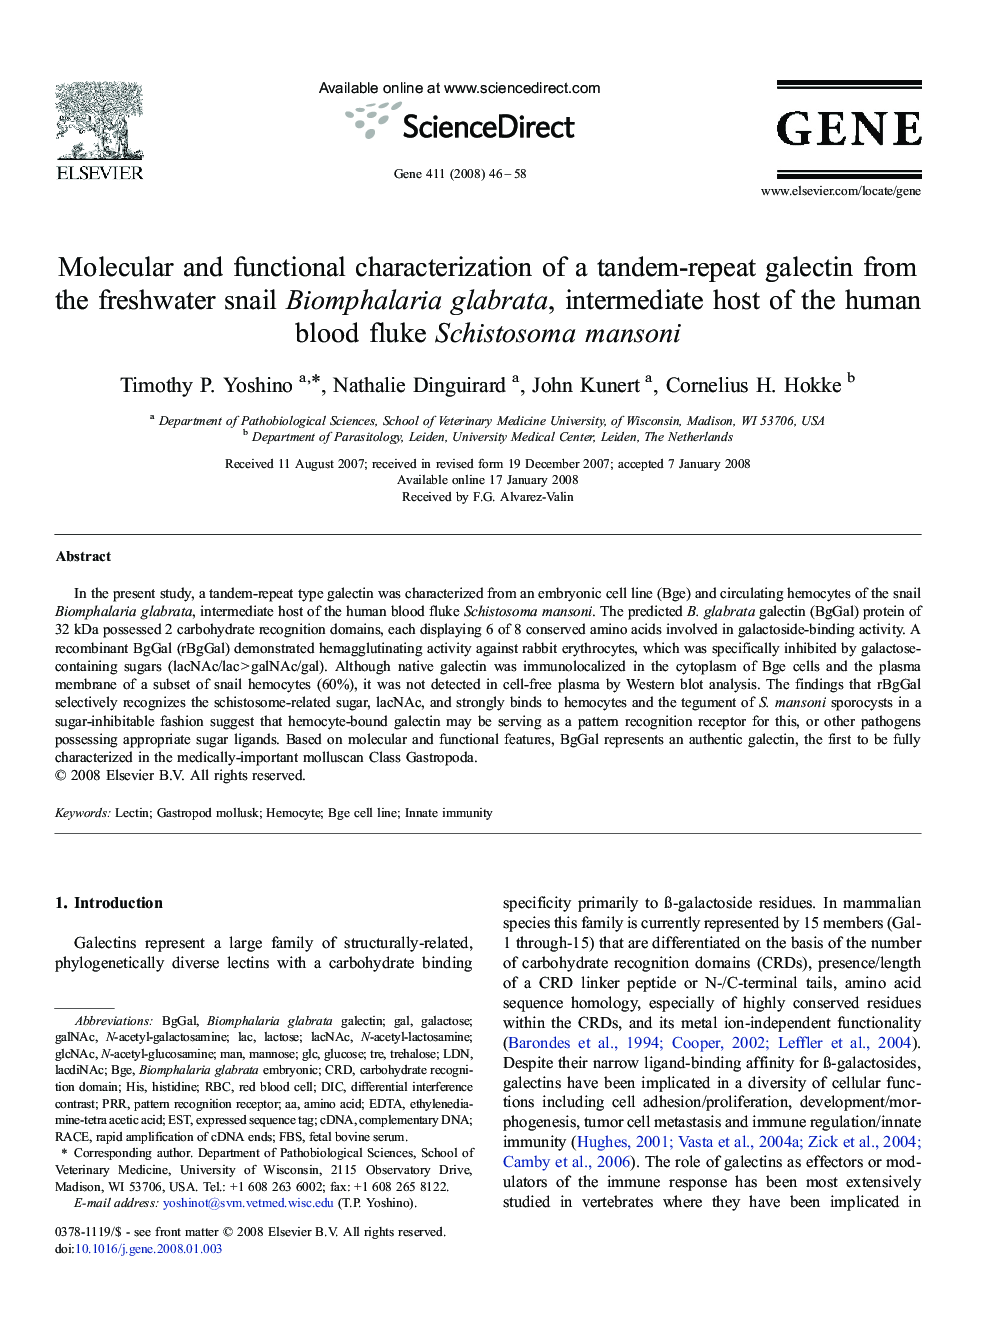 Molecular and functional characterization of a tandem-repeat galectin from the freshwater snail Biomphalaria glabrata, intermediate host of the human blood fluke Schistosoma mansoni